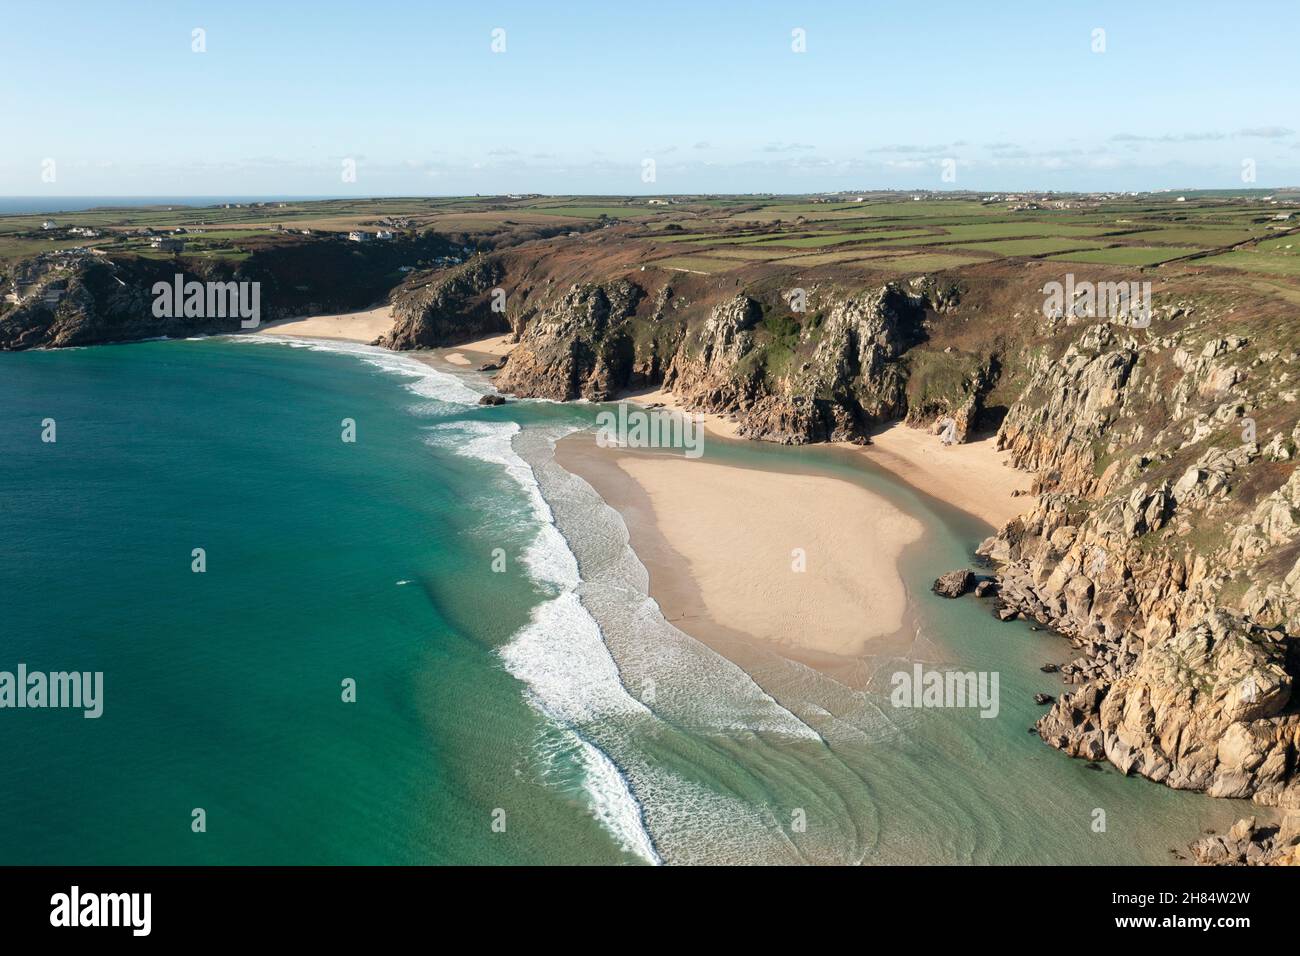 Aerial view of the clear waters of tropical looking Pedn Vounder beach, west Cornwall at low tide in winter. Stock Photo